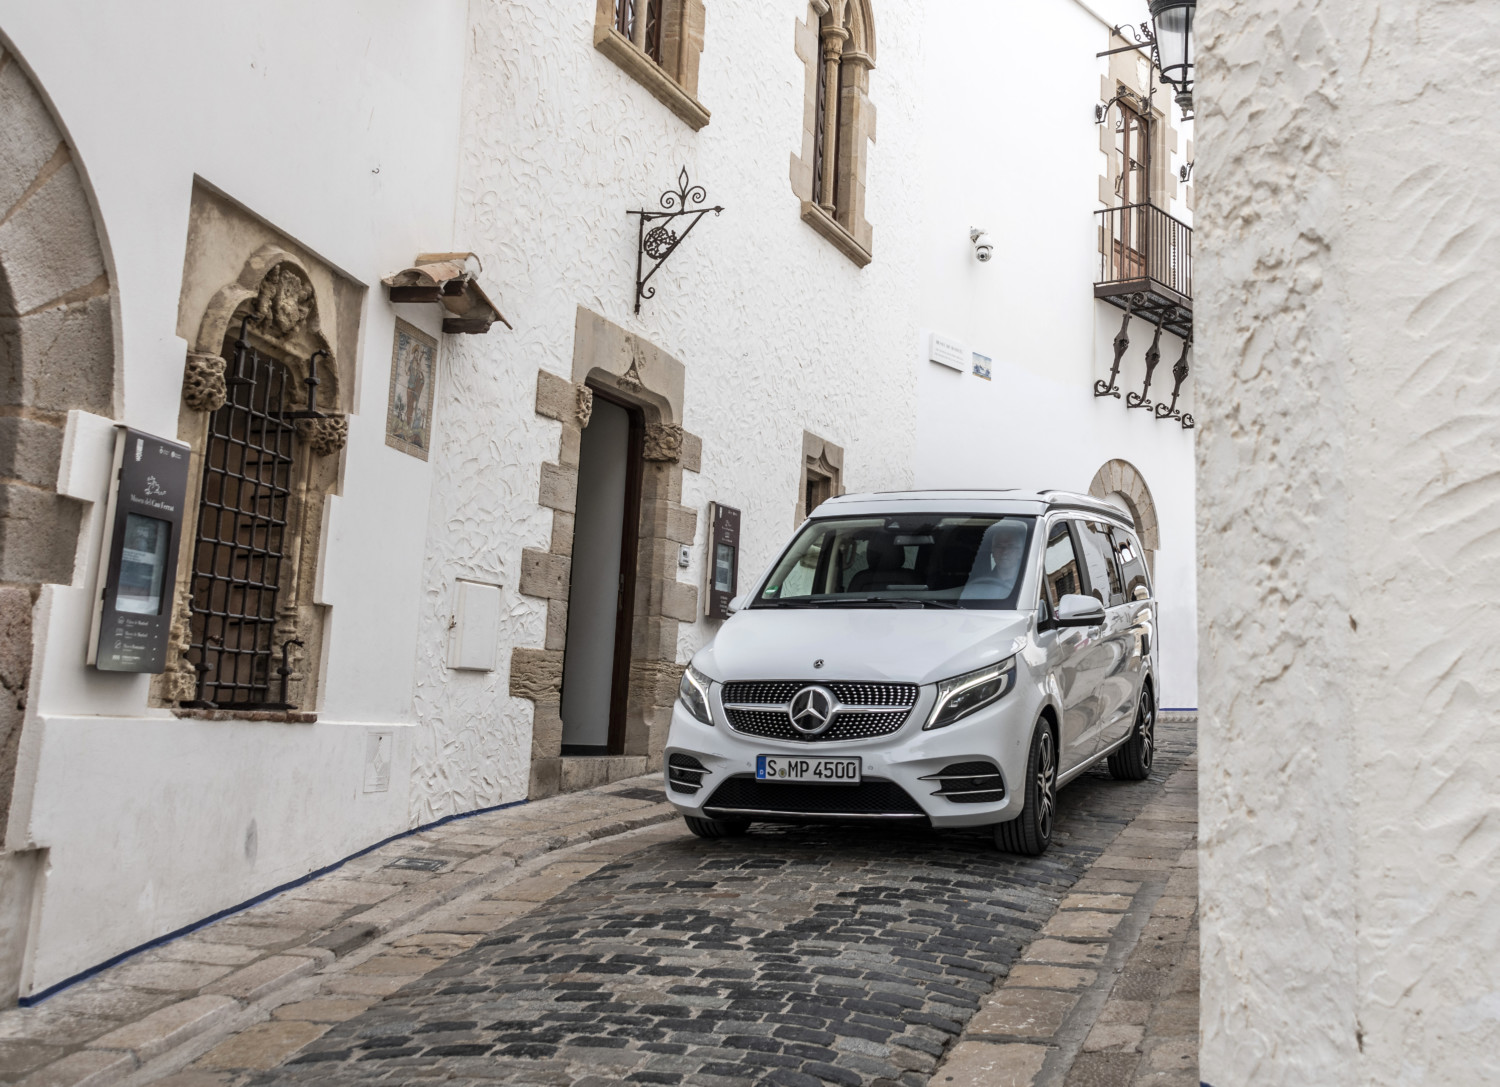 Die neue Mercedes-Benz V-Klasse und Marco Polo, Sitges/Spanien 2019 // The new Mercedes-Benz V-Class and Marco Polo, Sitges/Spain 2019